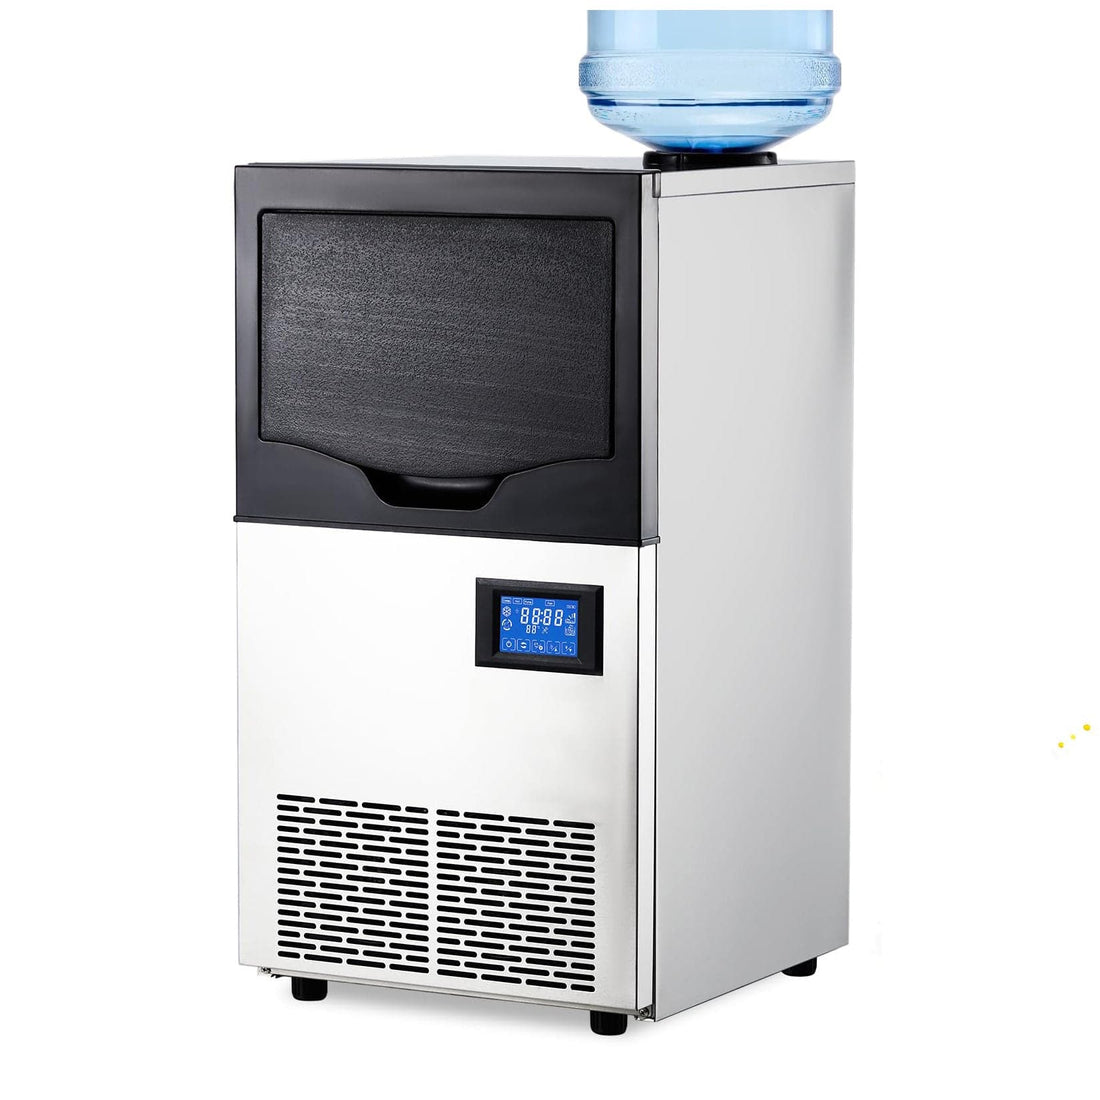 140Lbs/24H Ice Maker, Dual Water Inlet, 22Lbs Bin for Bars/Shops